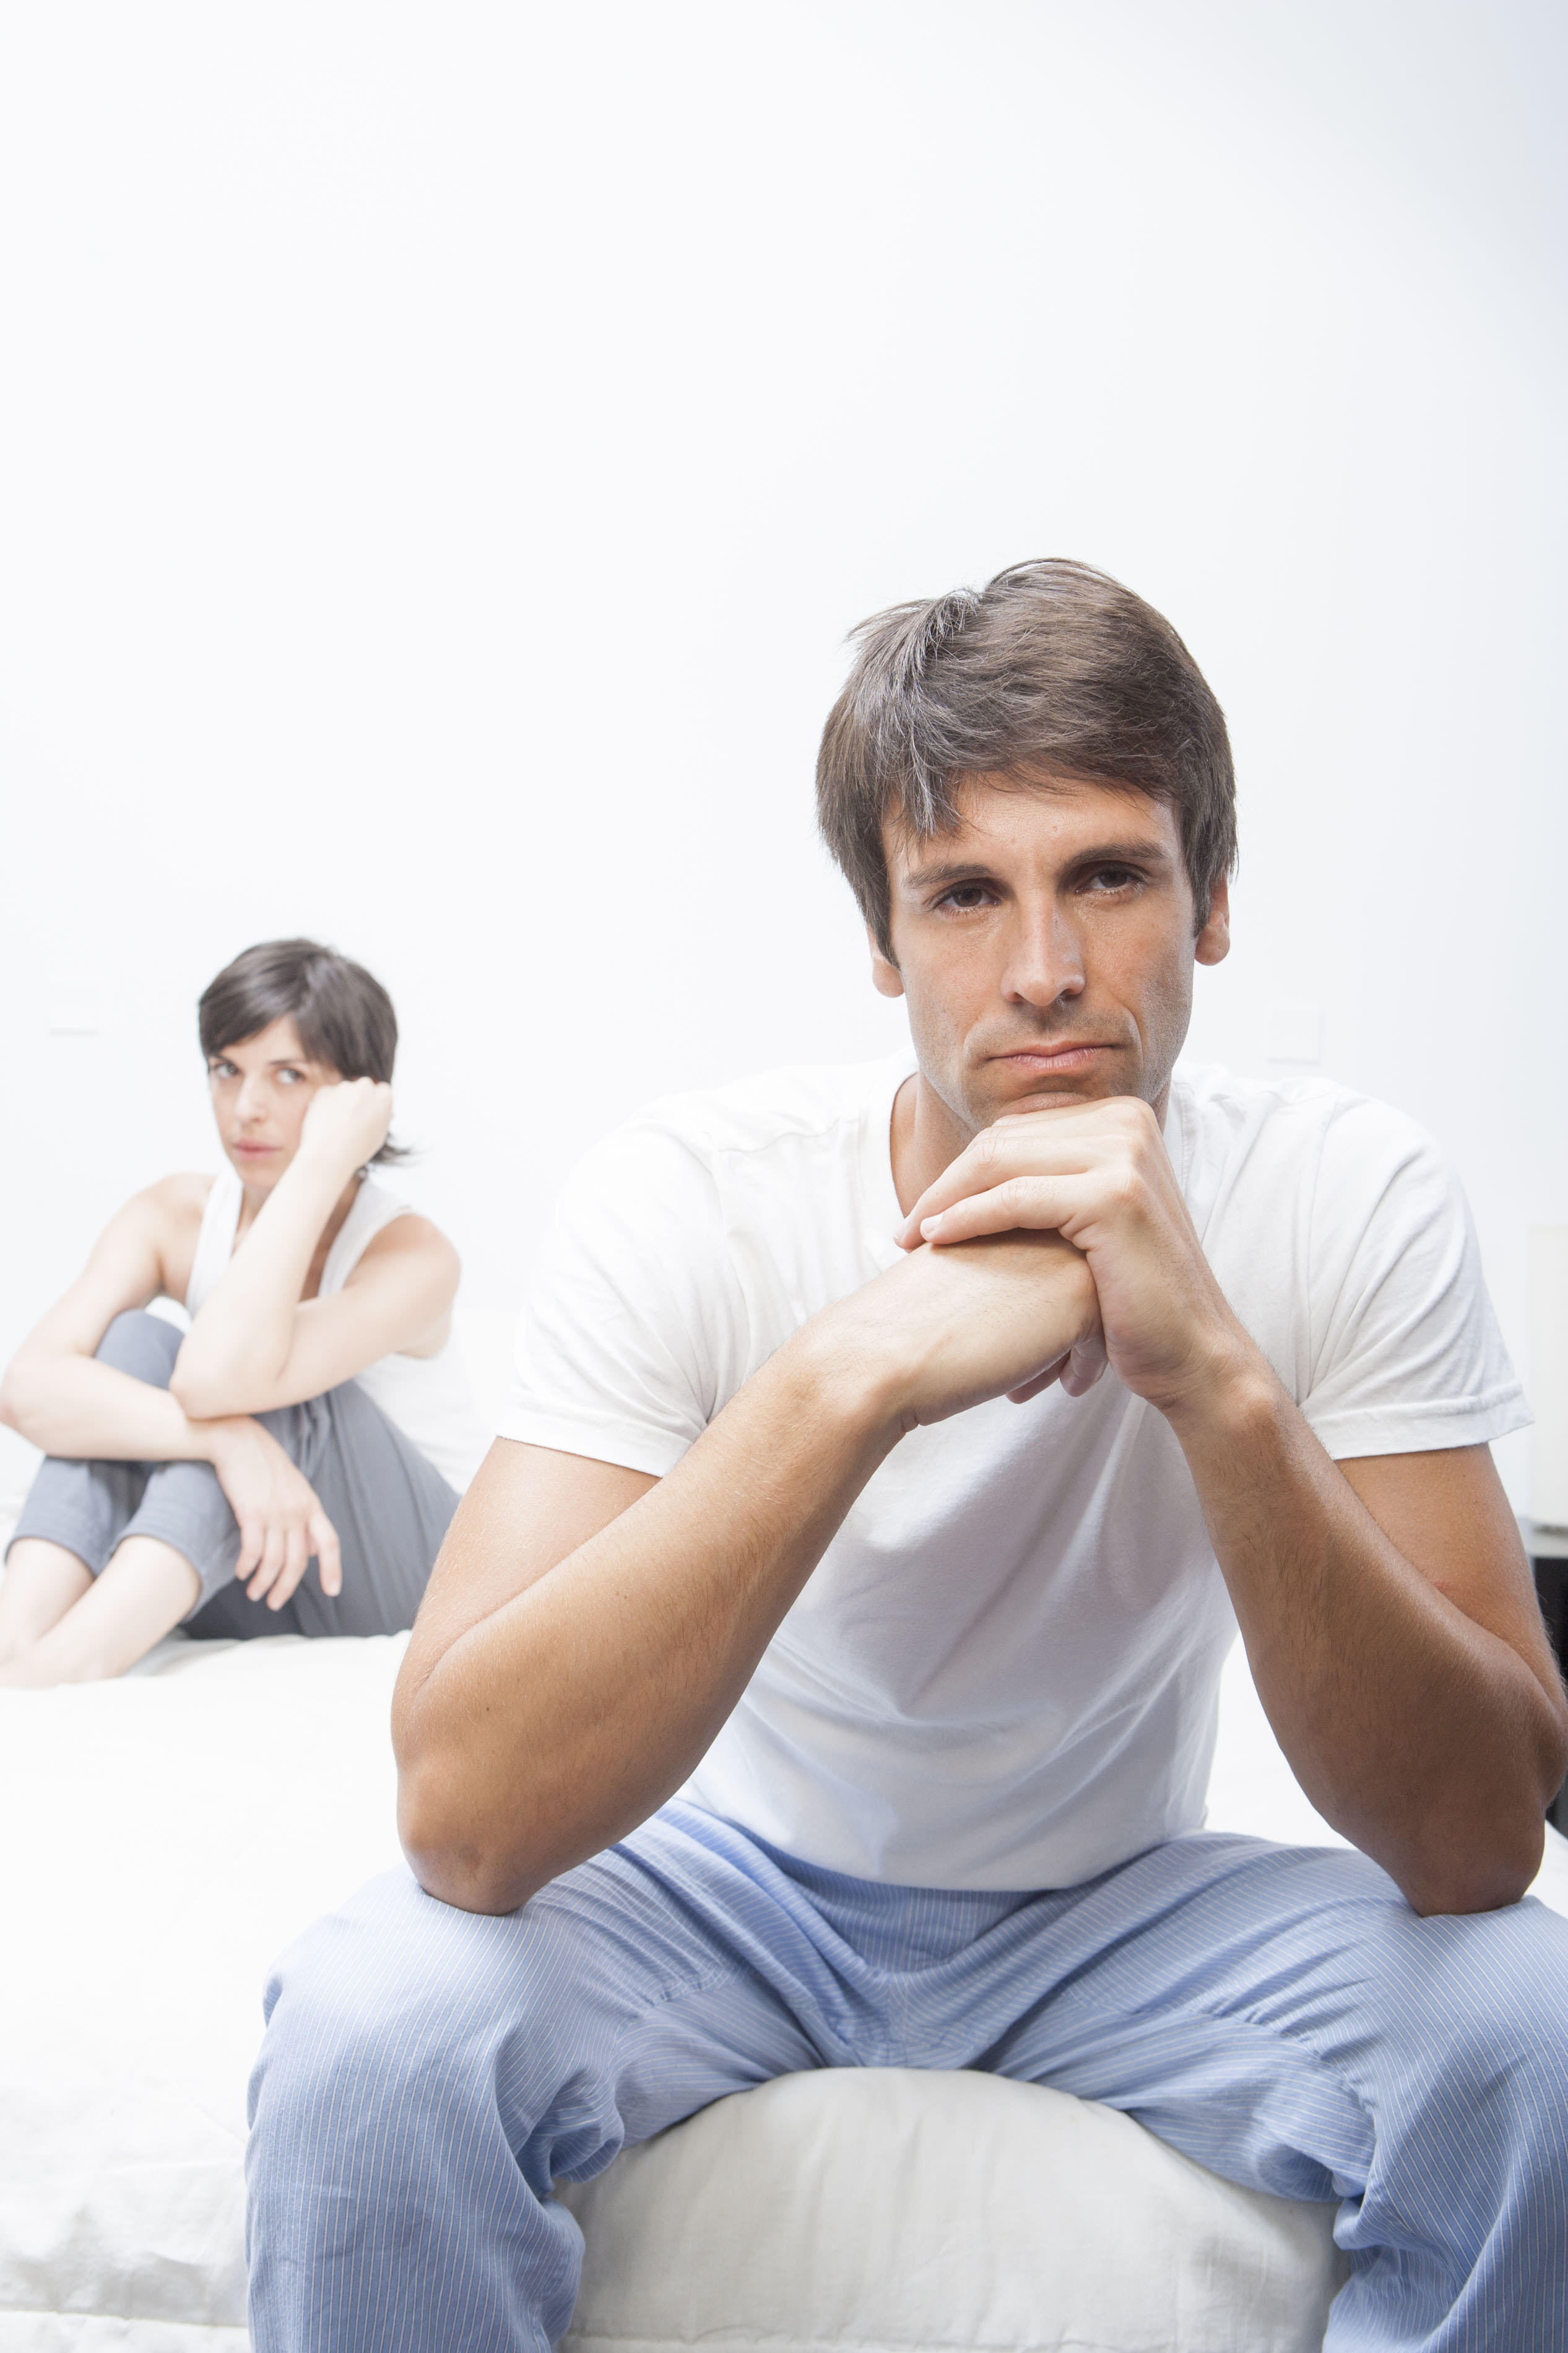 Couples counselling Calgary